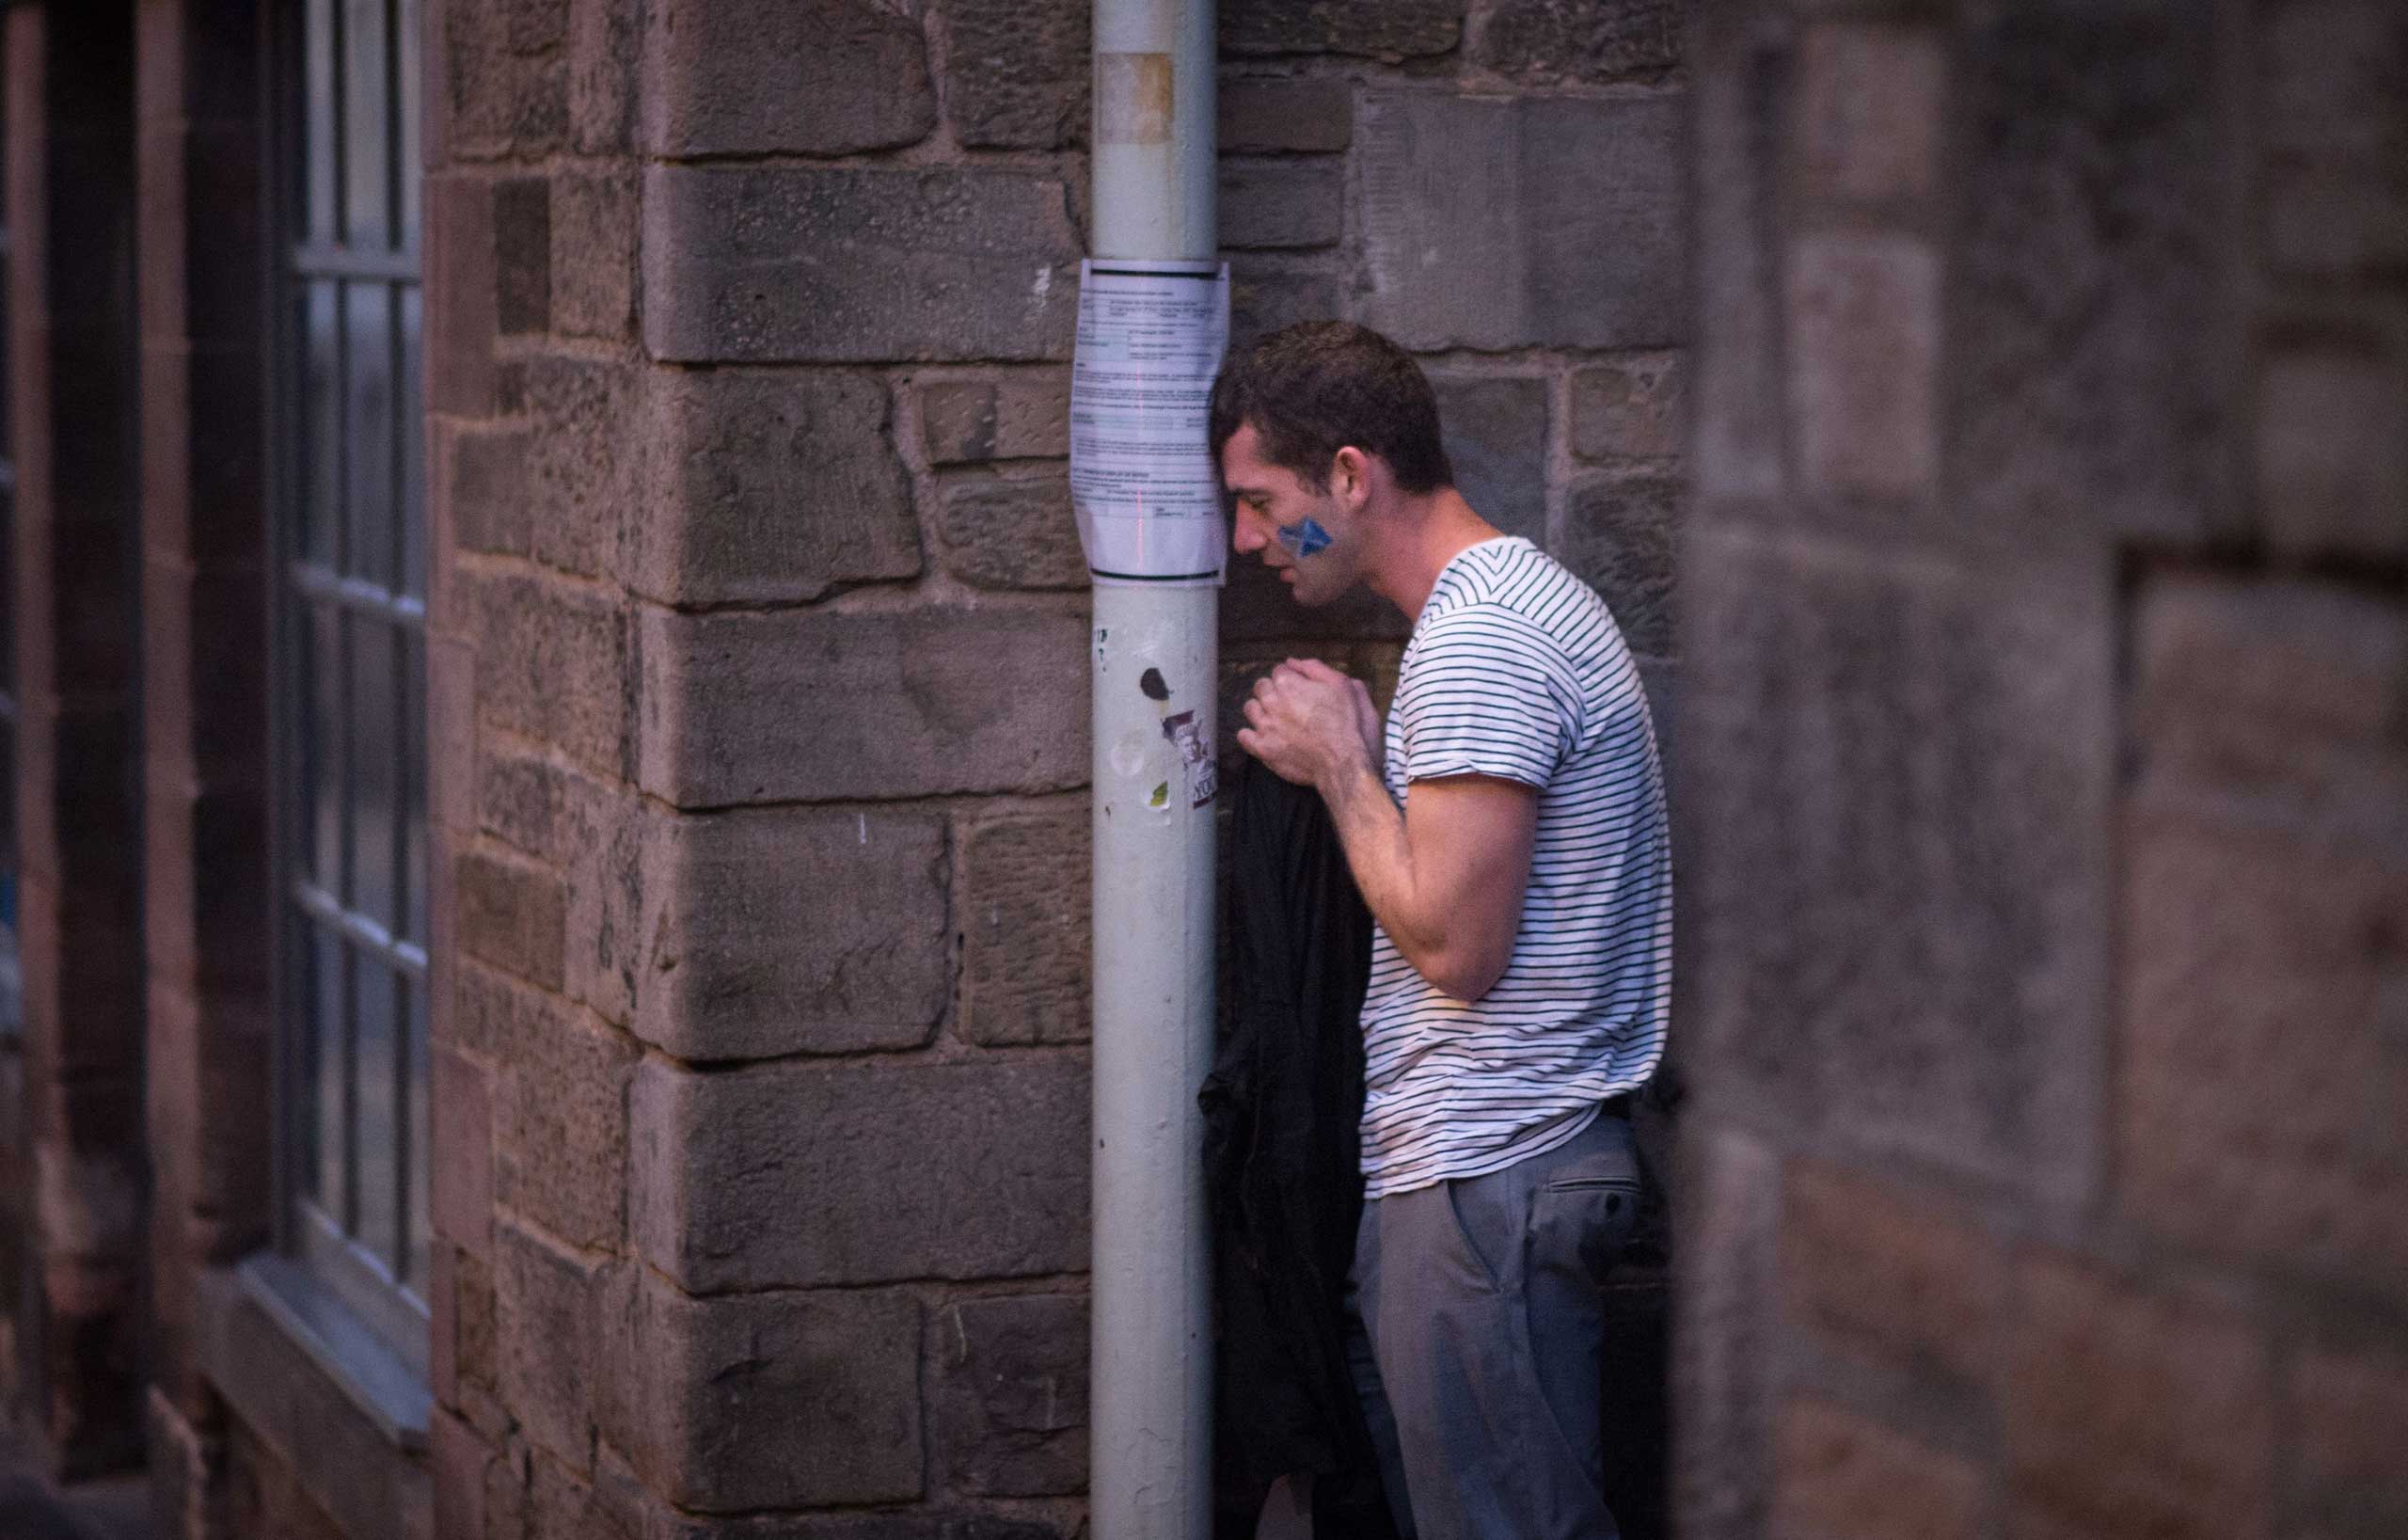 Sept. 19, 2014. A dejected  Yes  supporter in Edinburgh makes his way home in the early hours after Scotland voted to reject independence and remain part of the United Kingdom.